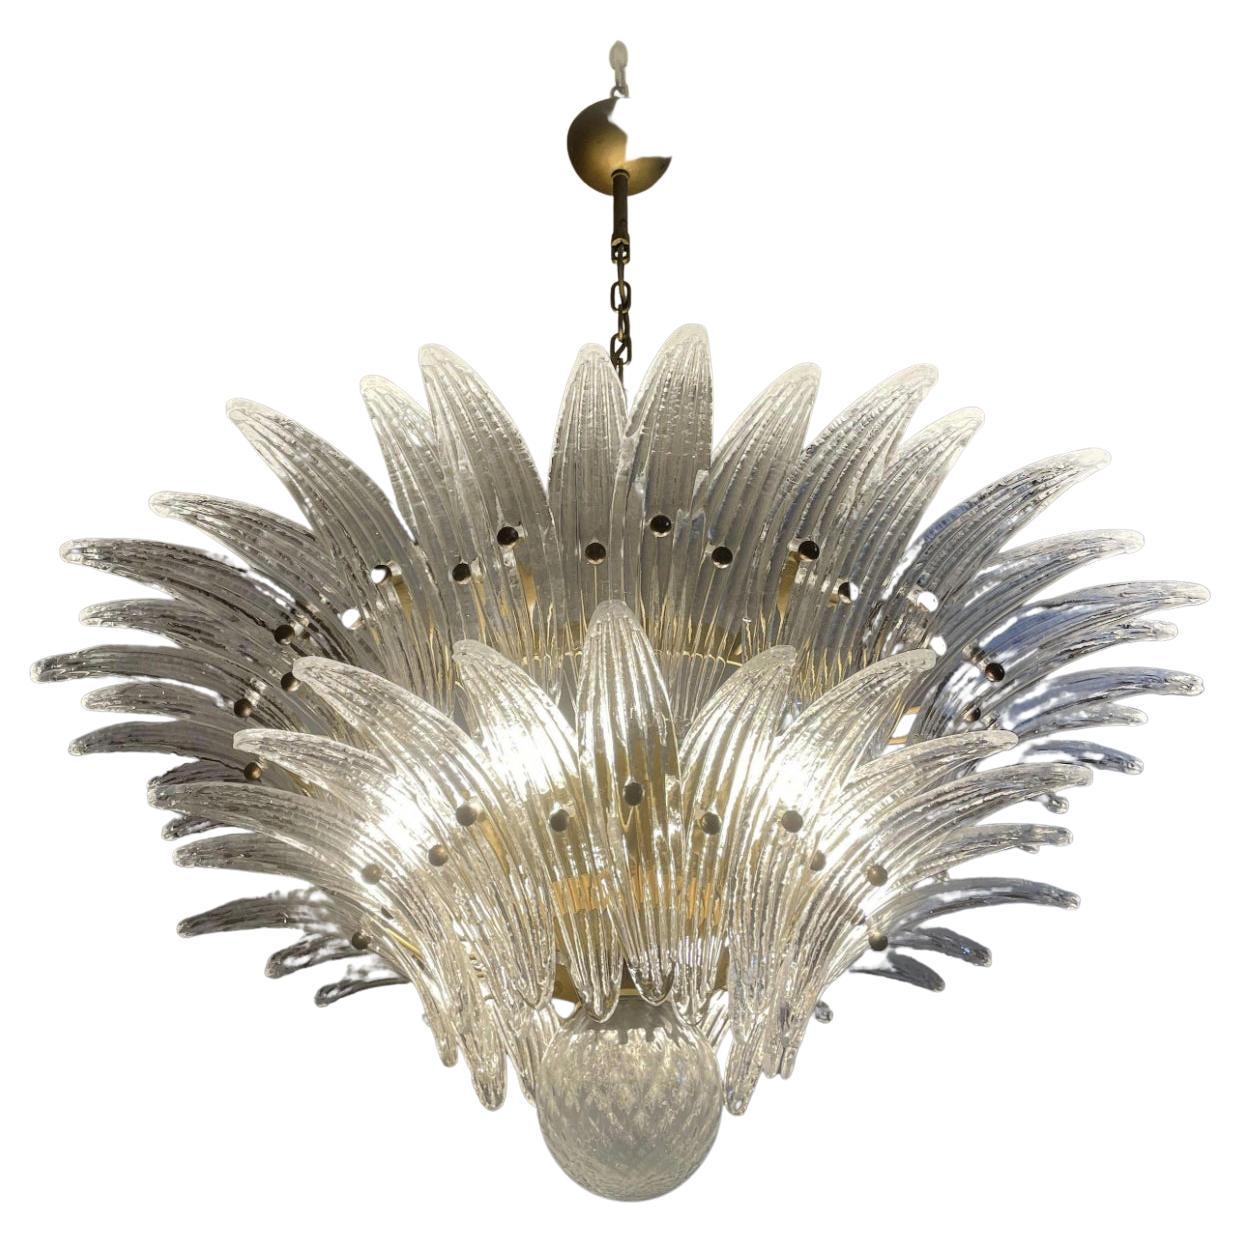 Pair Murano glass chandelier. Hand made in Murano. It made by 58 Murano crystal glasses in a gold metal frame. The chandelier has also a Murano glass ball in the end of the lamp. Murano blown glass in a traditional way.Period:1970's /